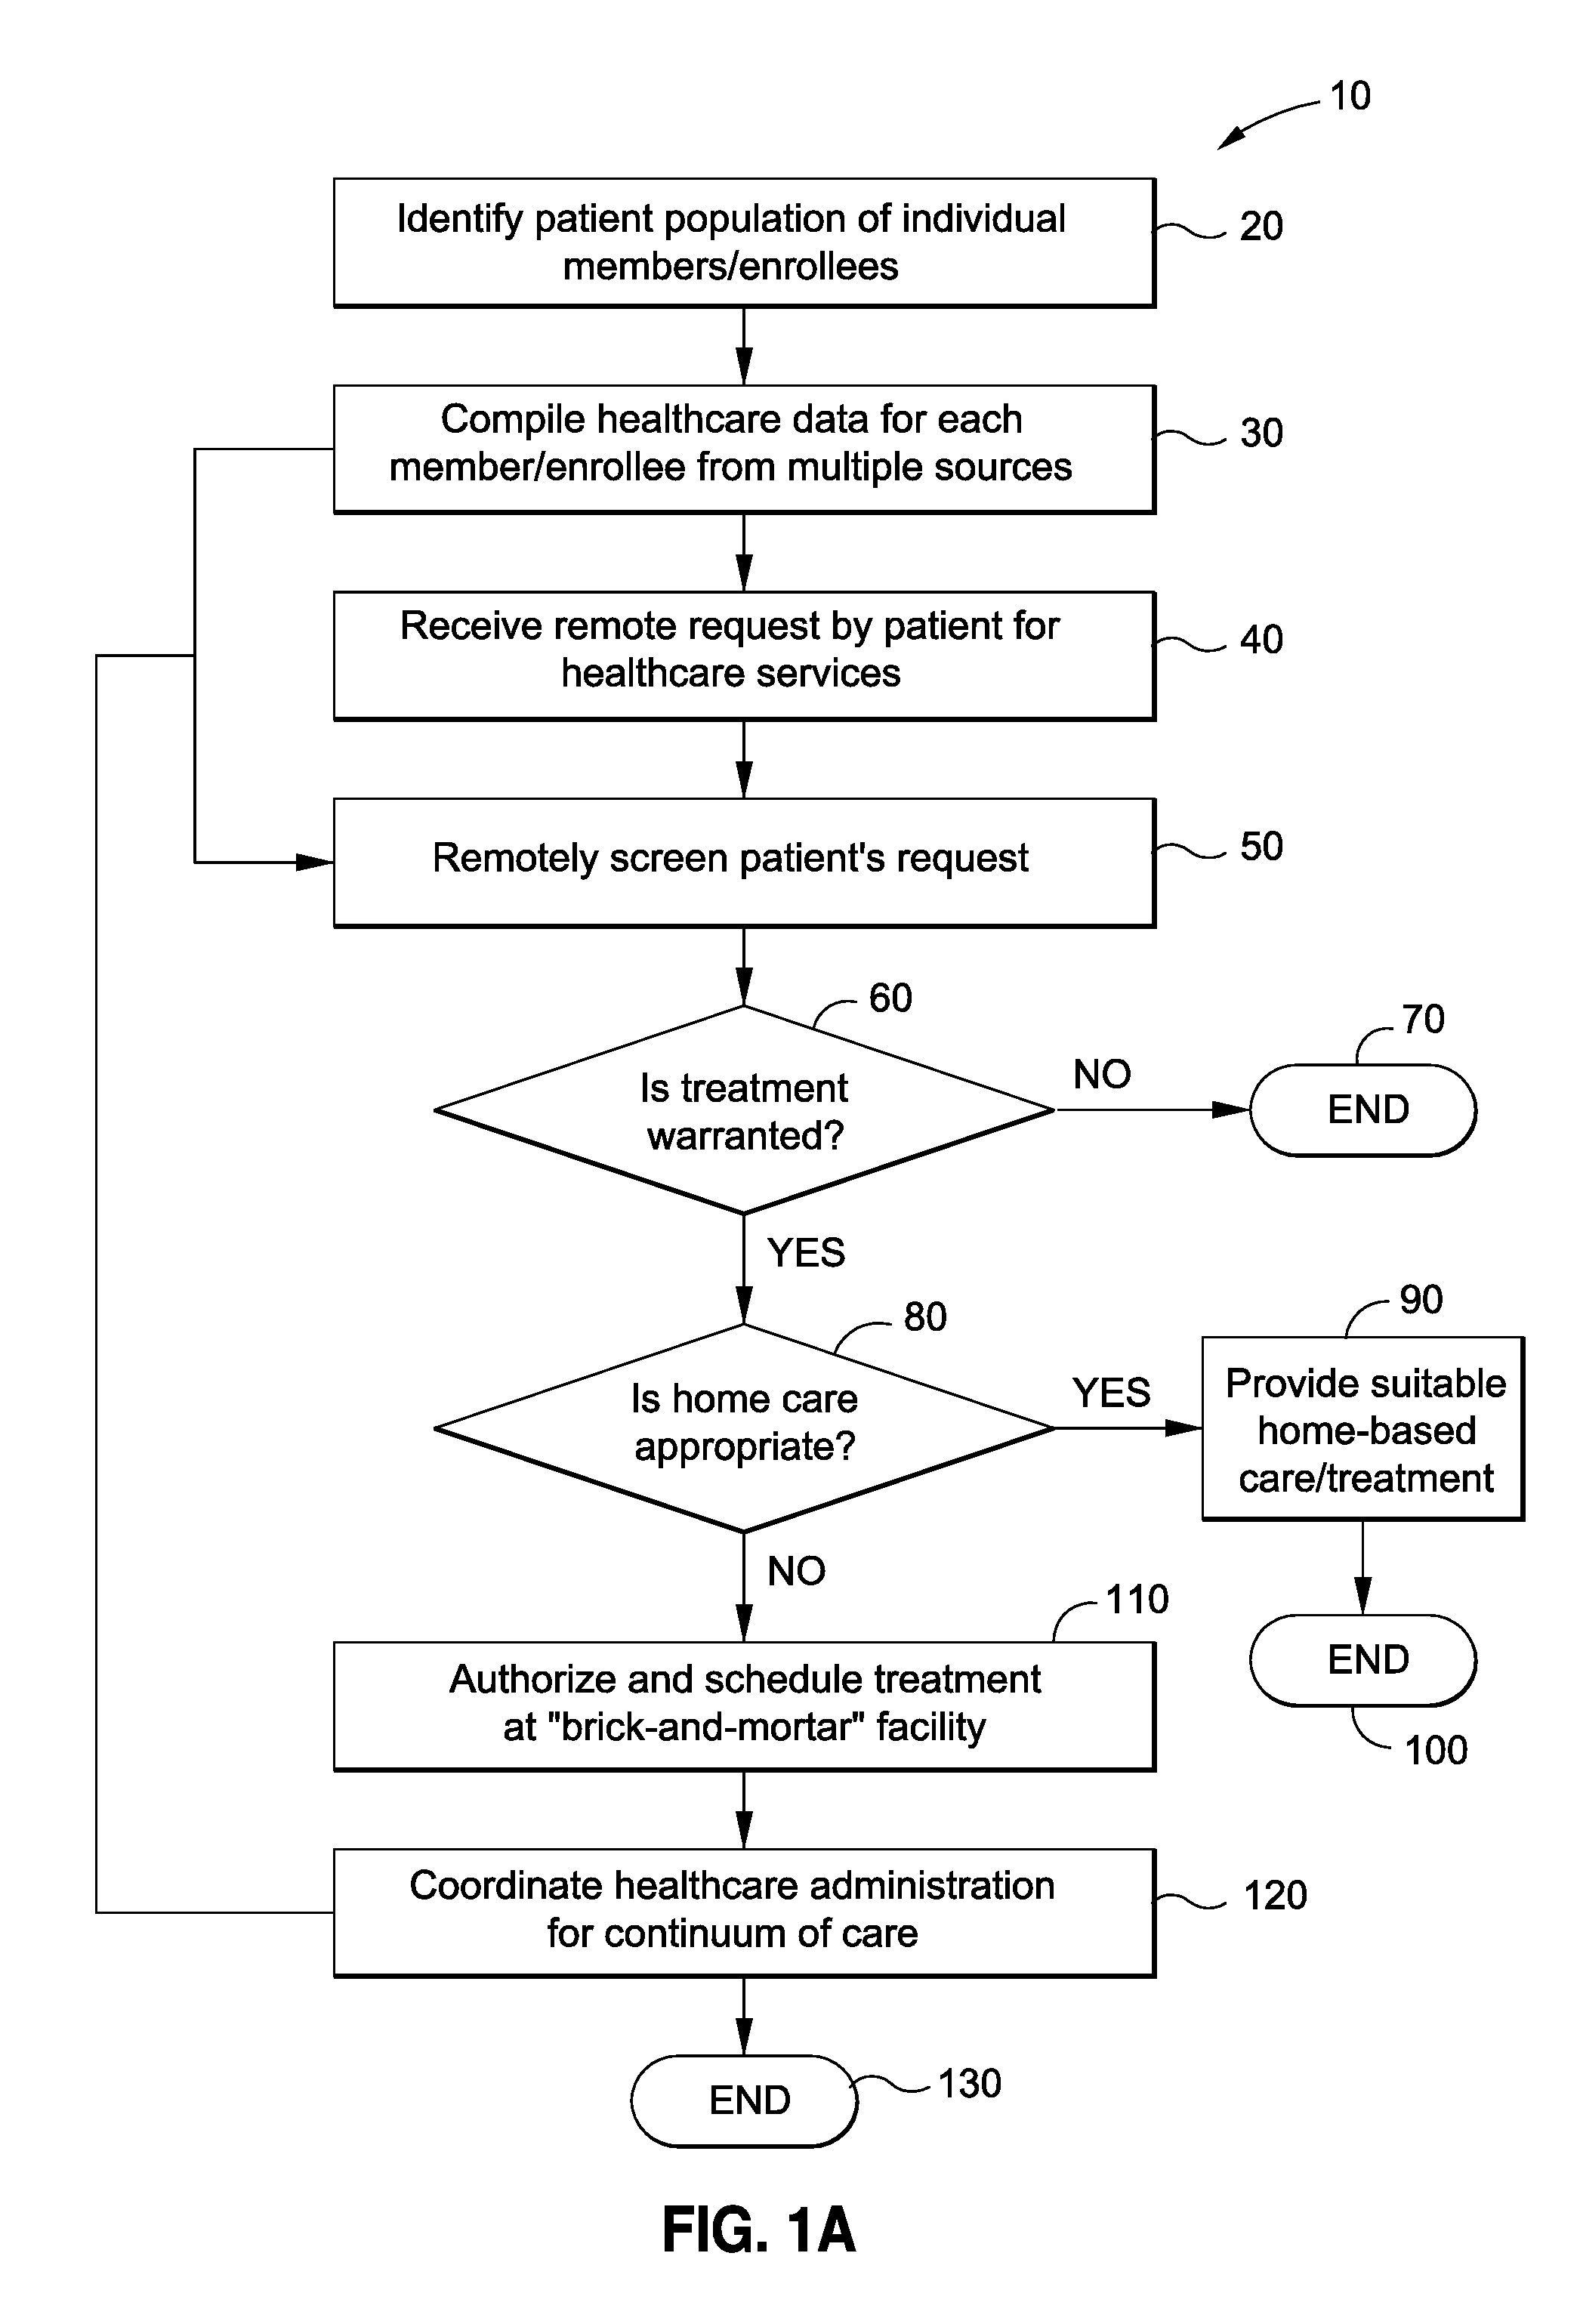 File management structure and system